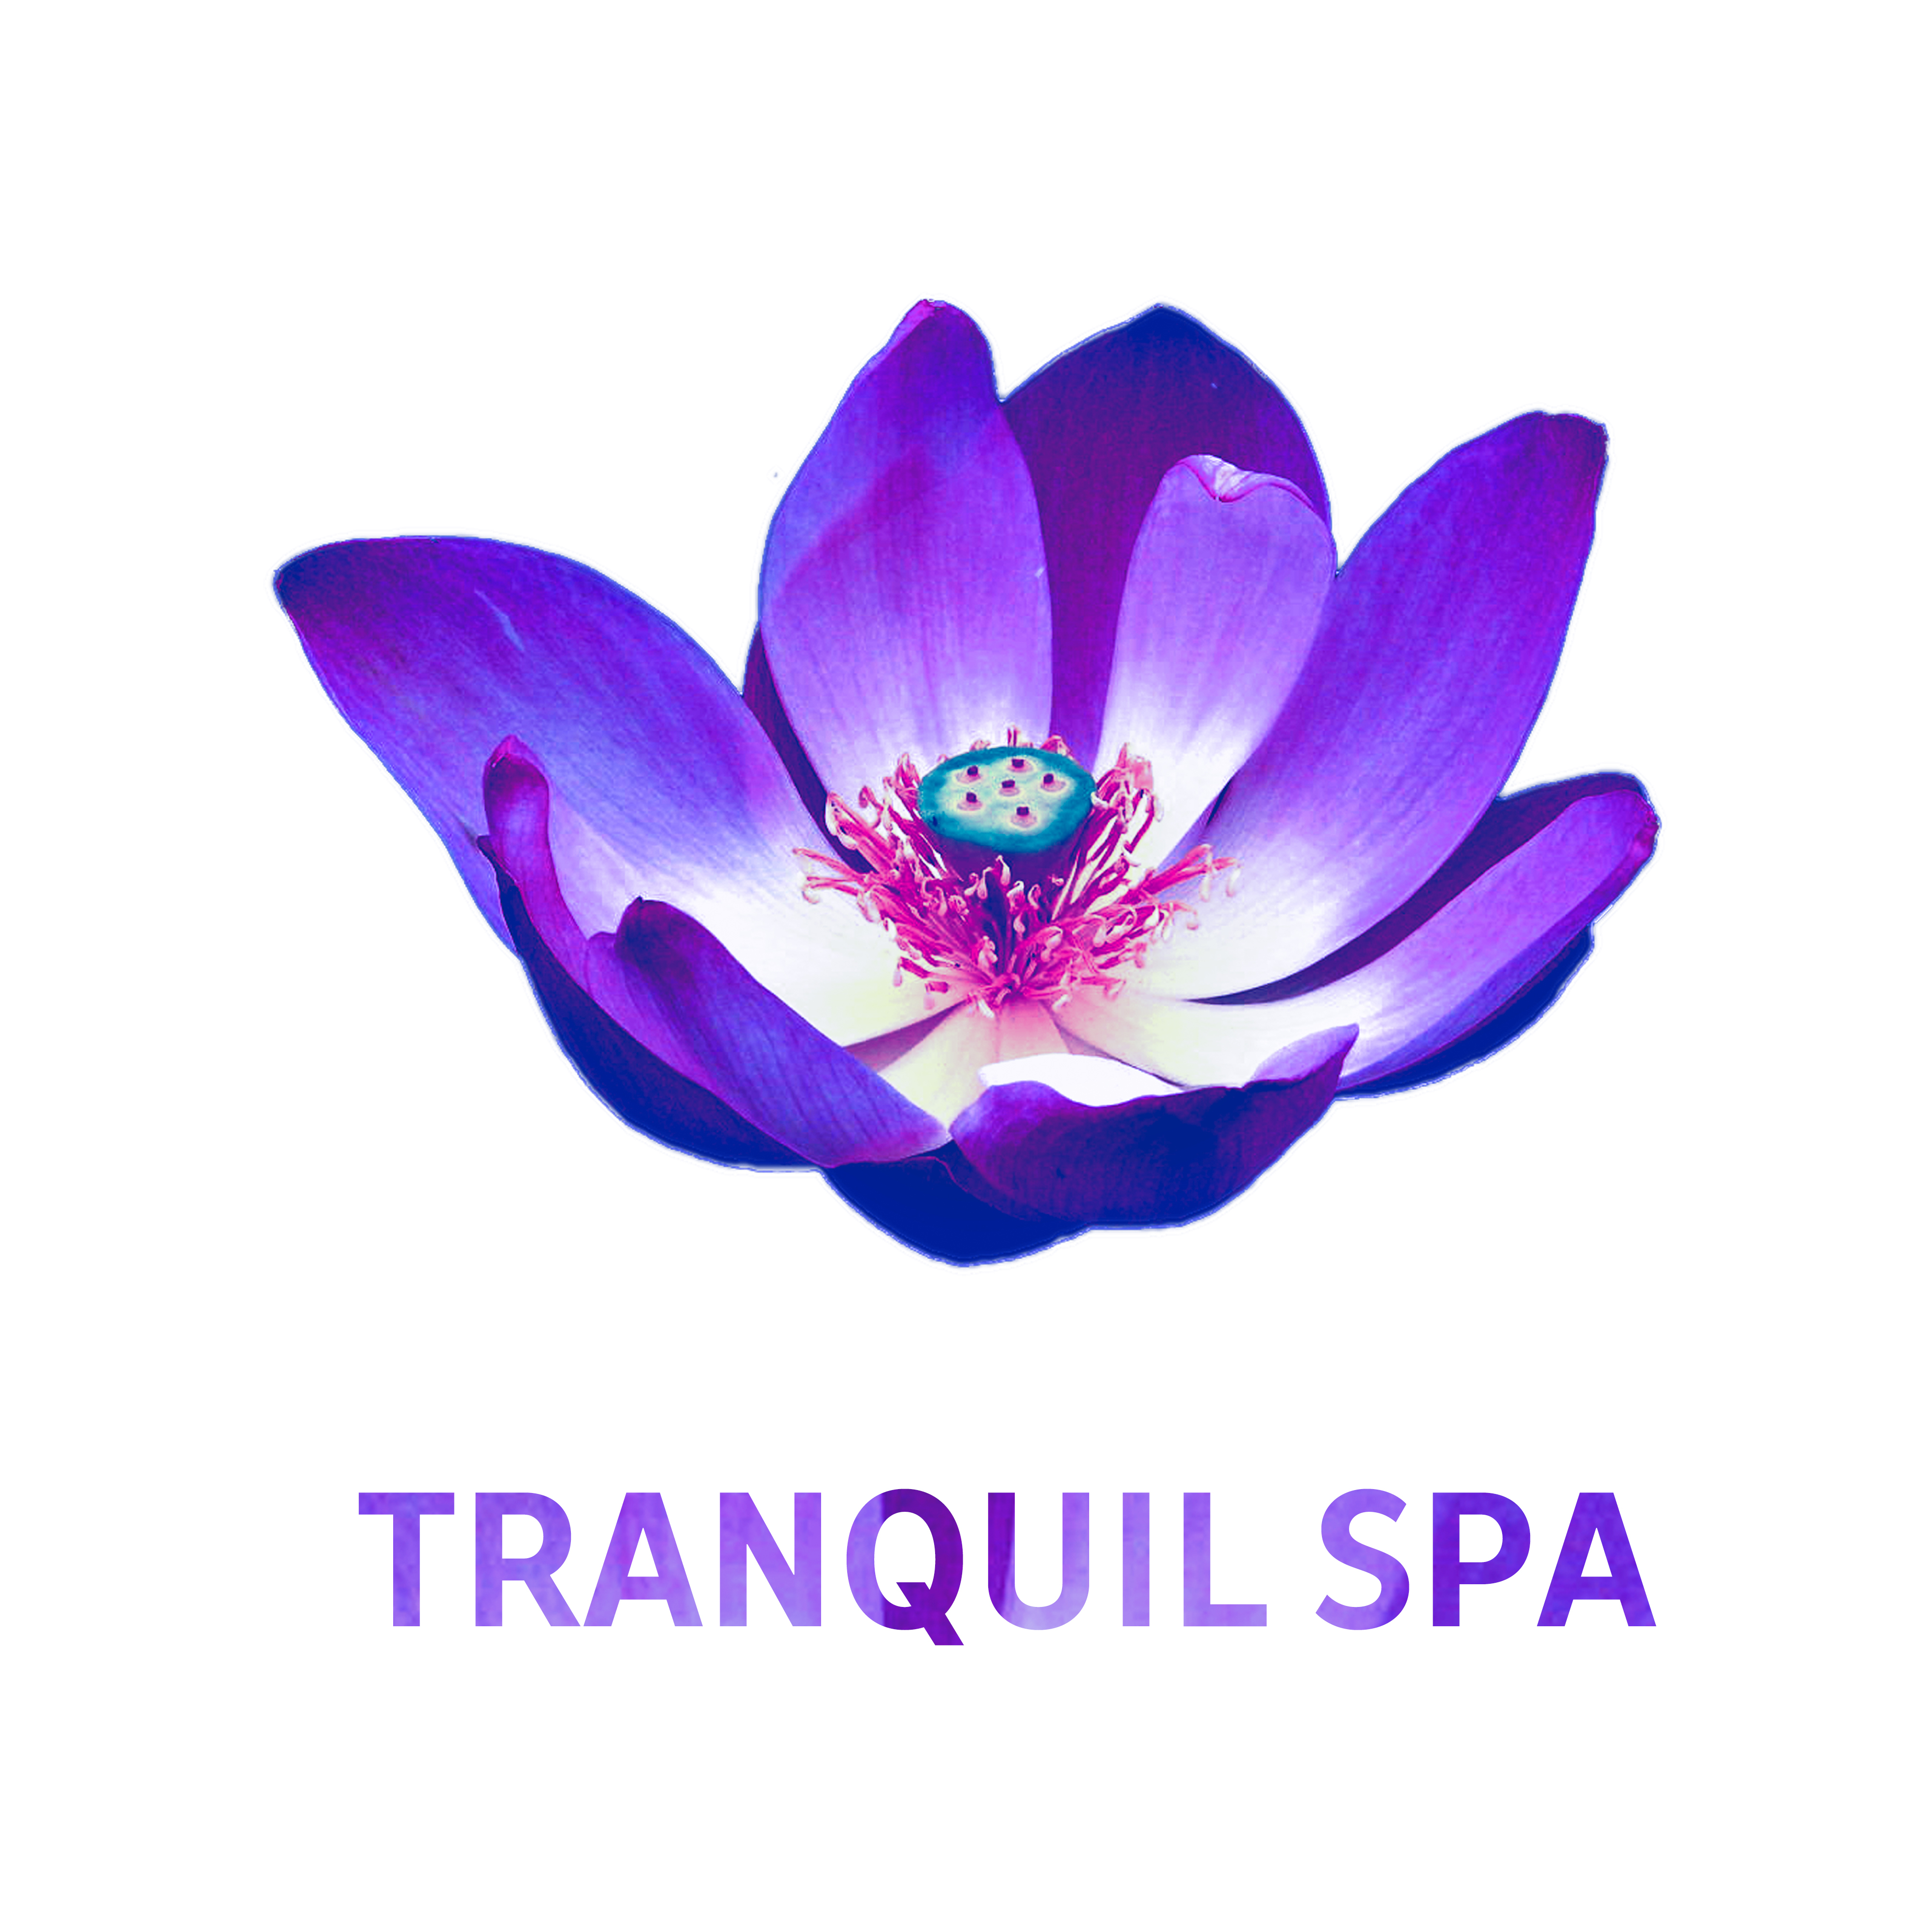 Tranquil Spa  Pure Relaxation, Sensual Massage, Relaxing Therapy for Body, Stress Relief, Spa Music, Relaxation Wellness, Nature Sounds